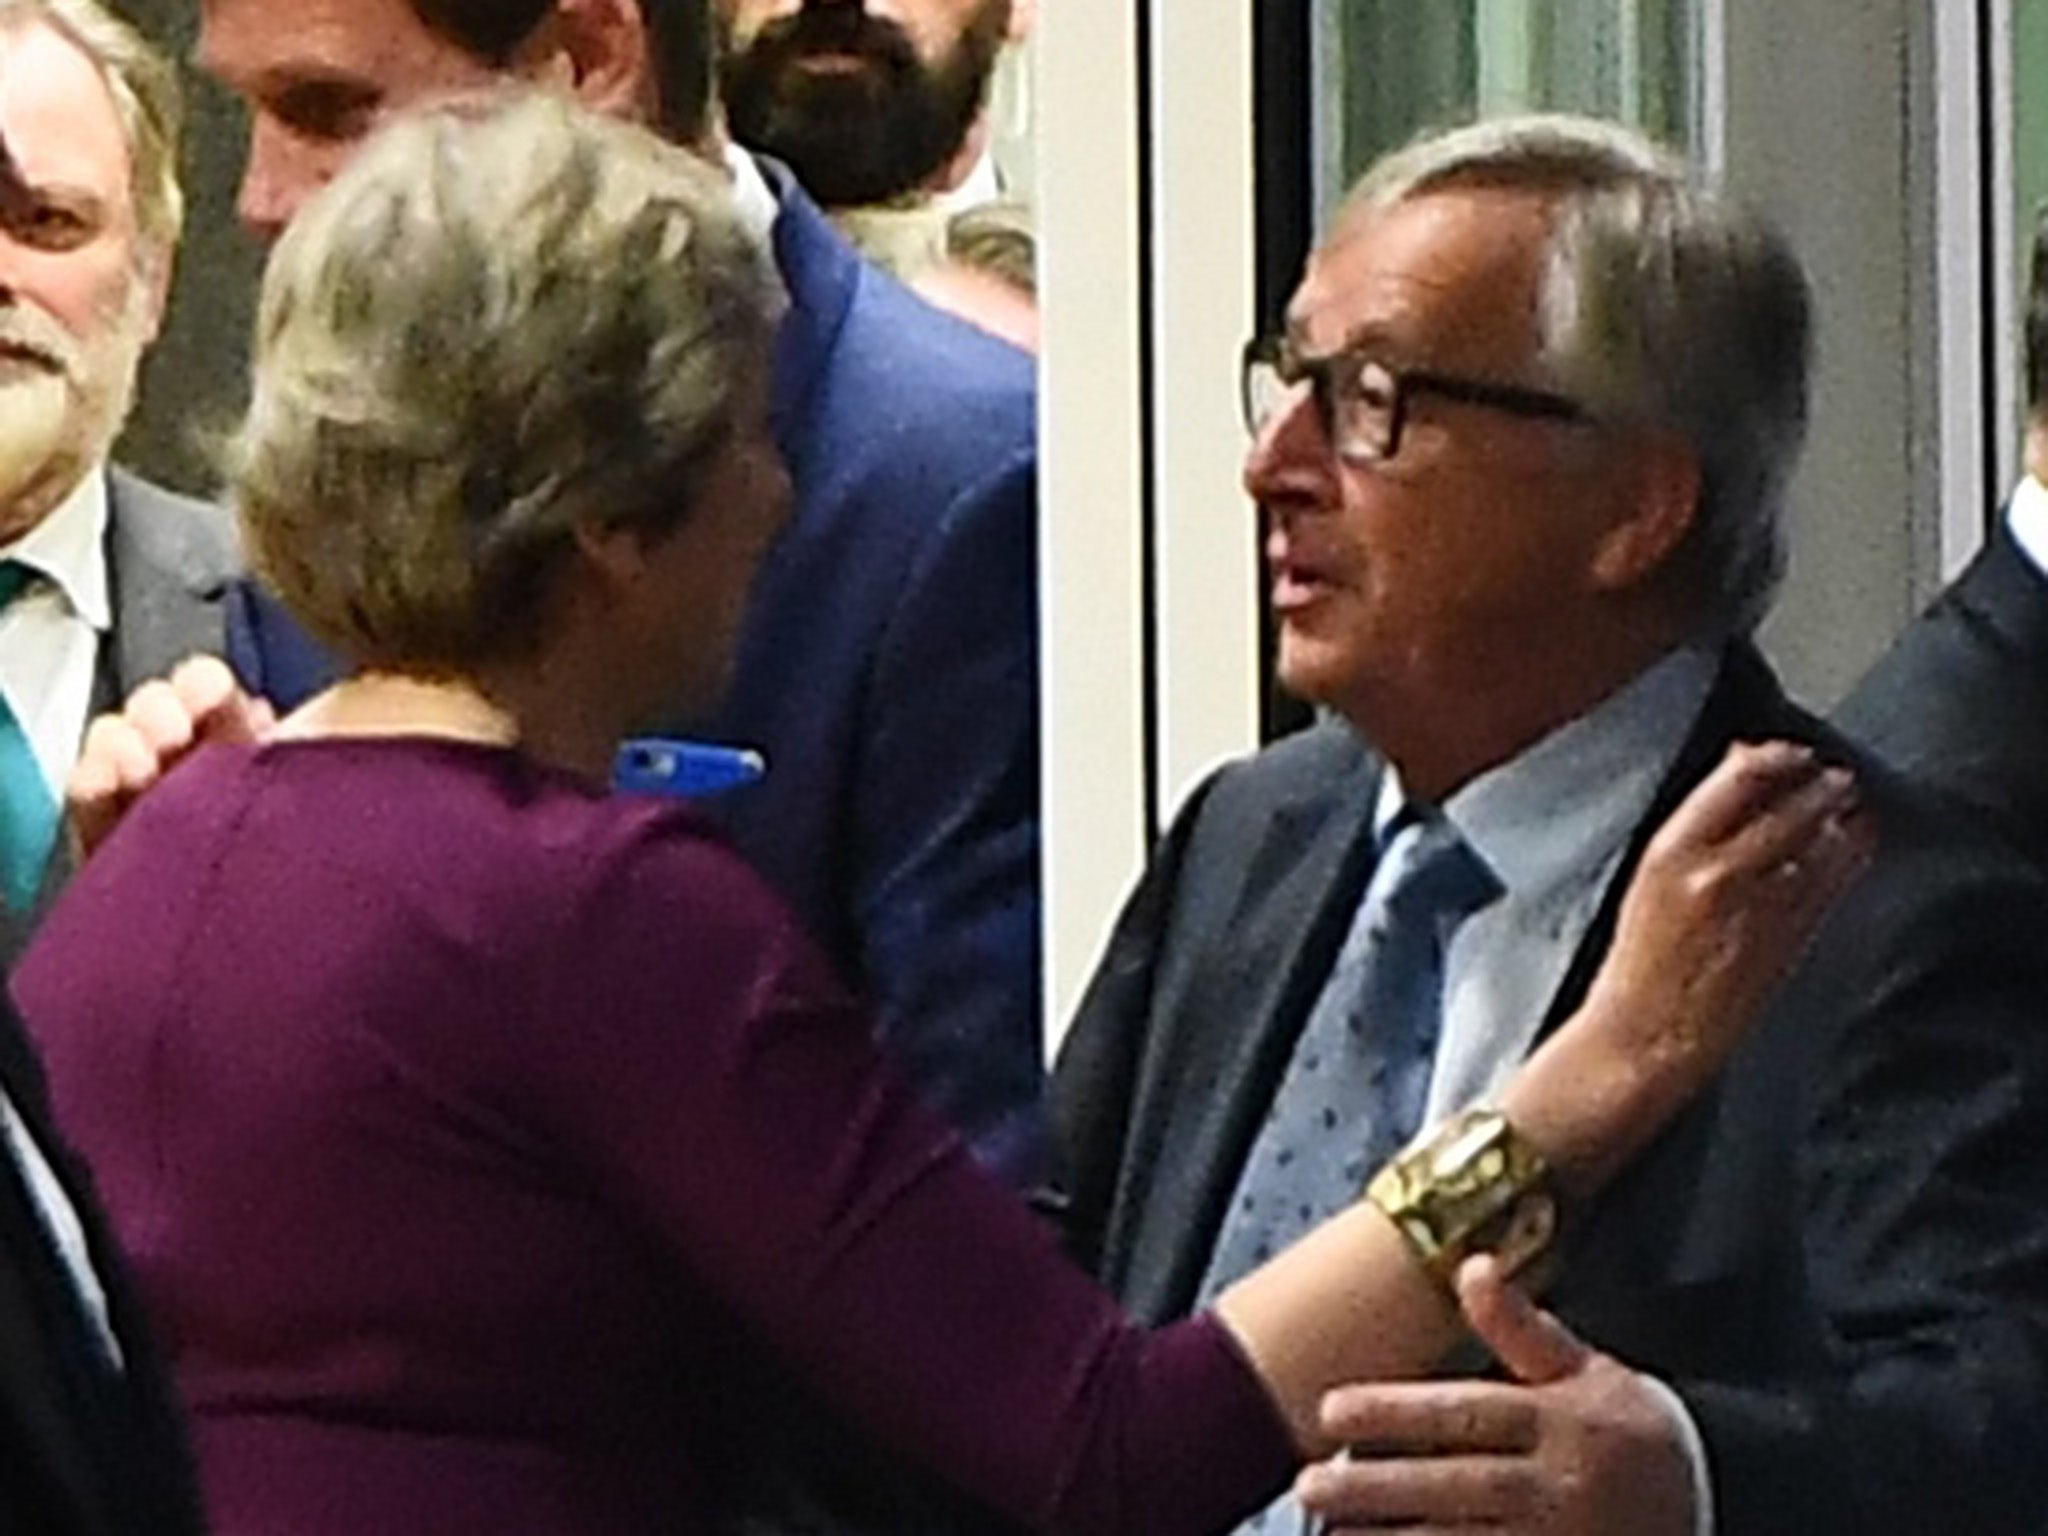 Theresa May hugs Jean-Claude Juncker after a meeting at the European Commission